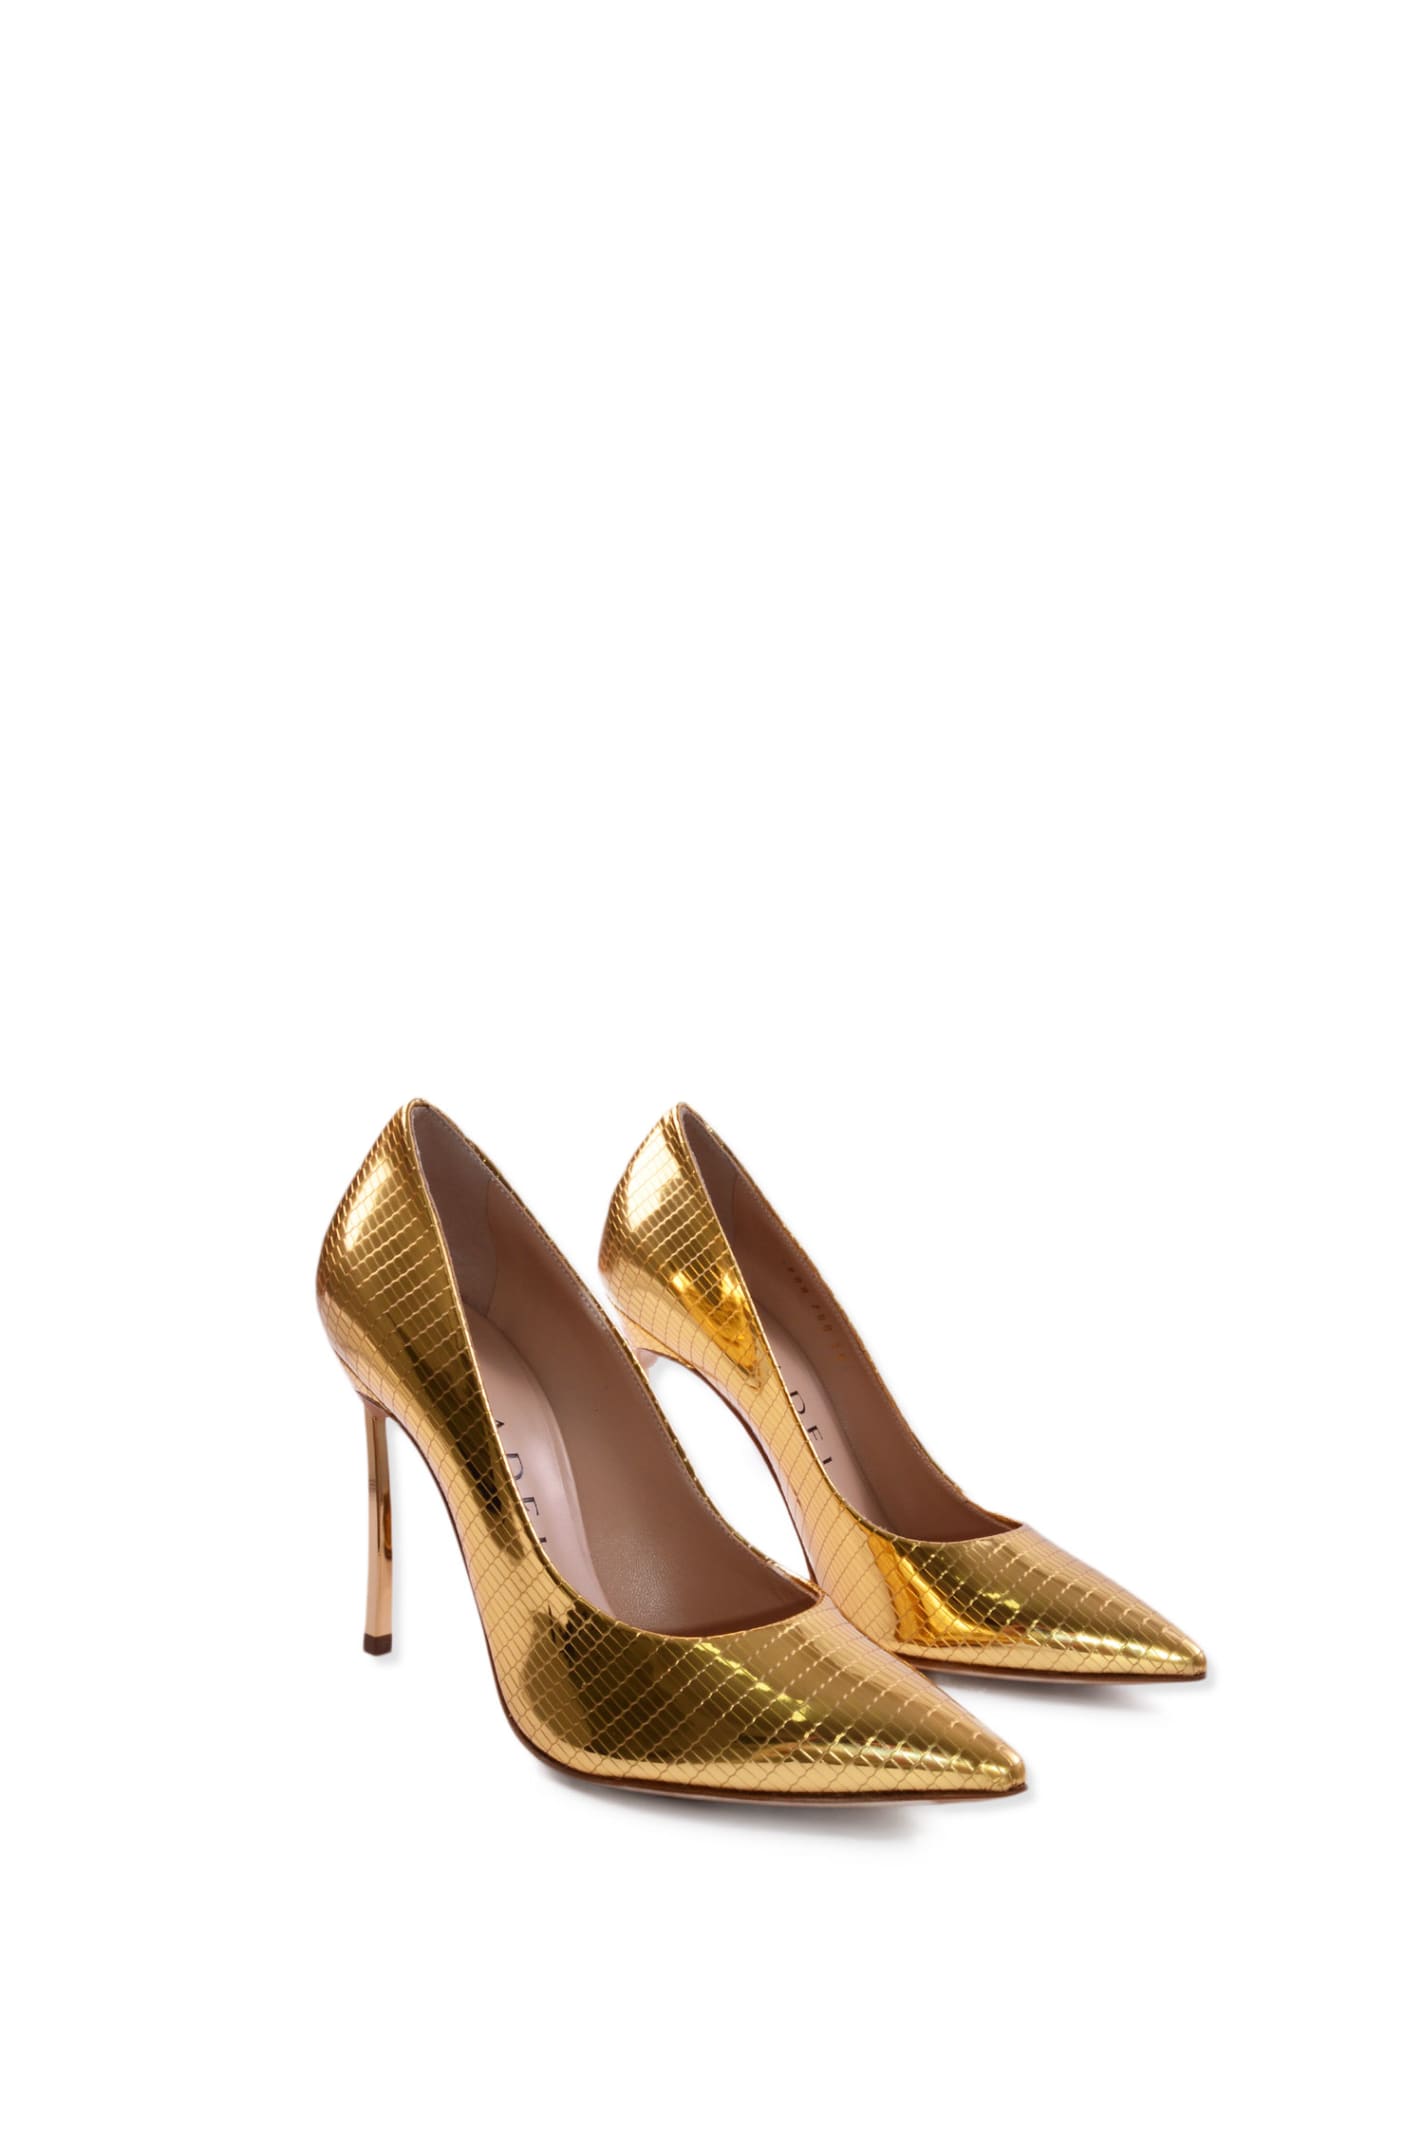 Shop Casadei Shoes With Heels In Golden